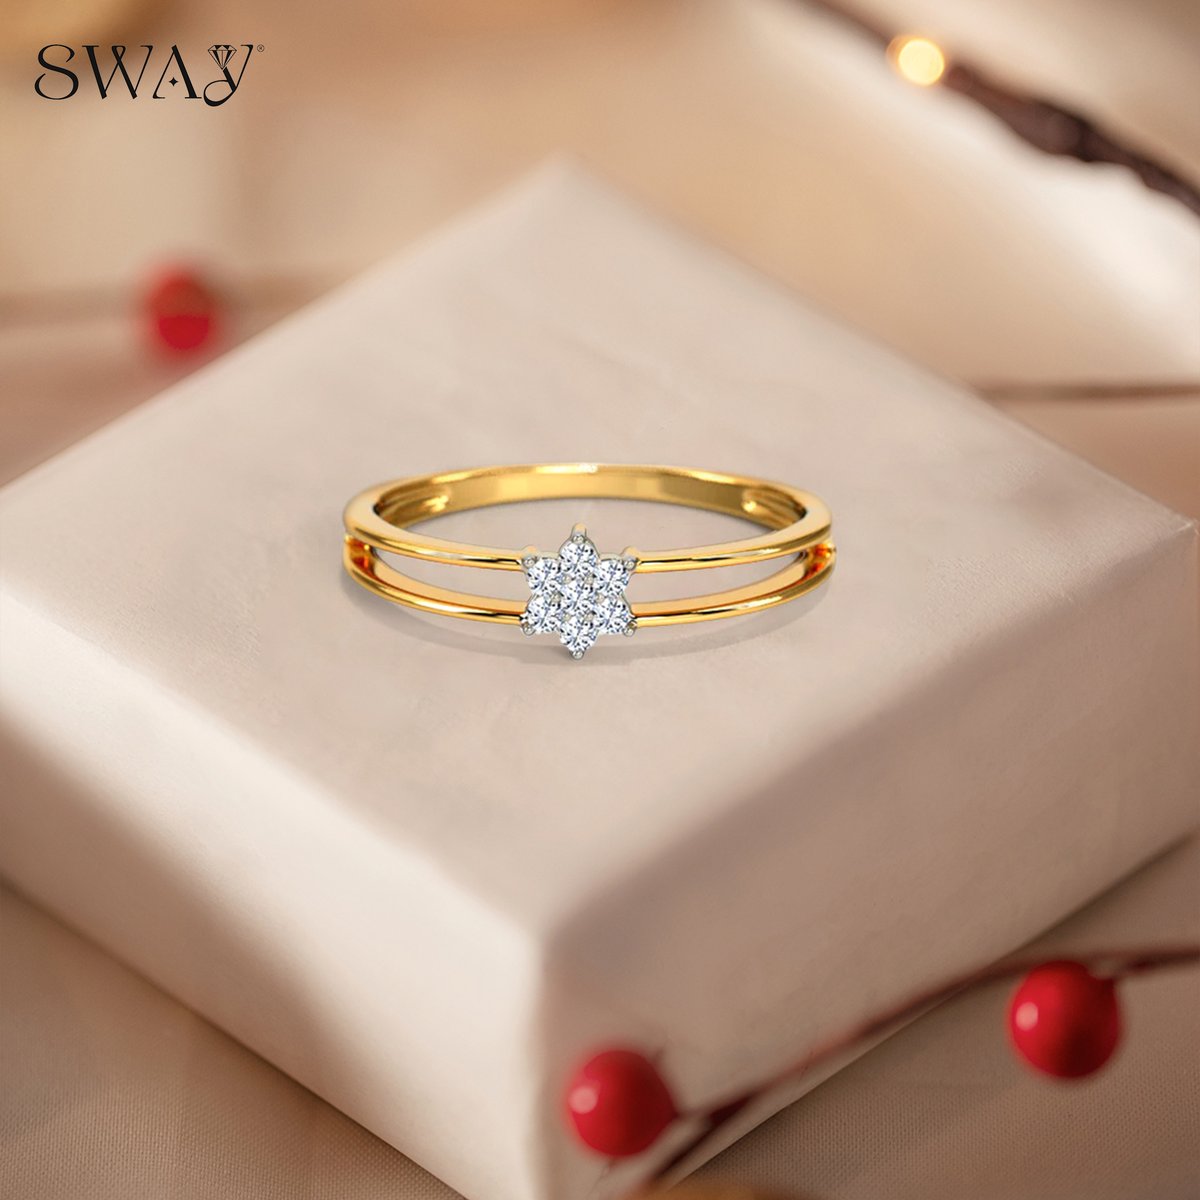 Exchange. Upgrade. Repeat.📷
With SWAY’s 100% lifetime exchange policy, you can stay in with the trends and keep upgrading to the newest diamond style as per your liking.

[Celebrations, Diamonds, Gifts, Jewellery, rings, gold, Diamonds, Diamond Bracelet, New Service]